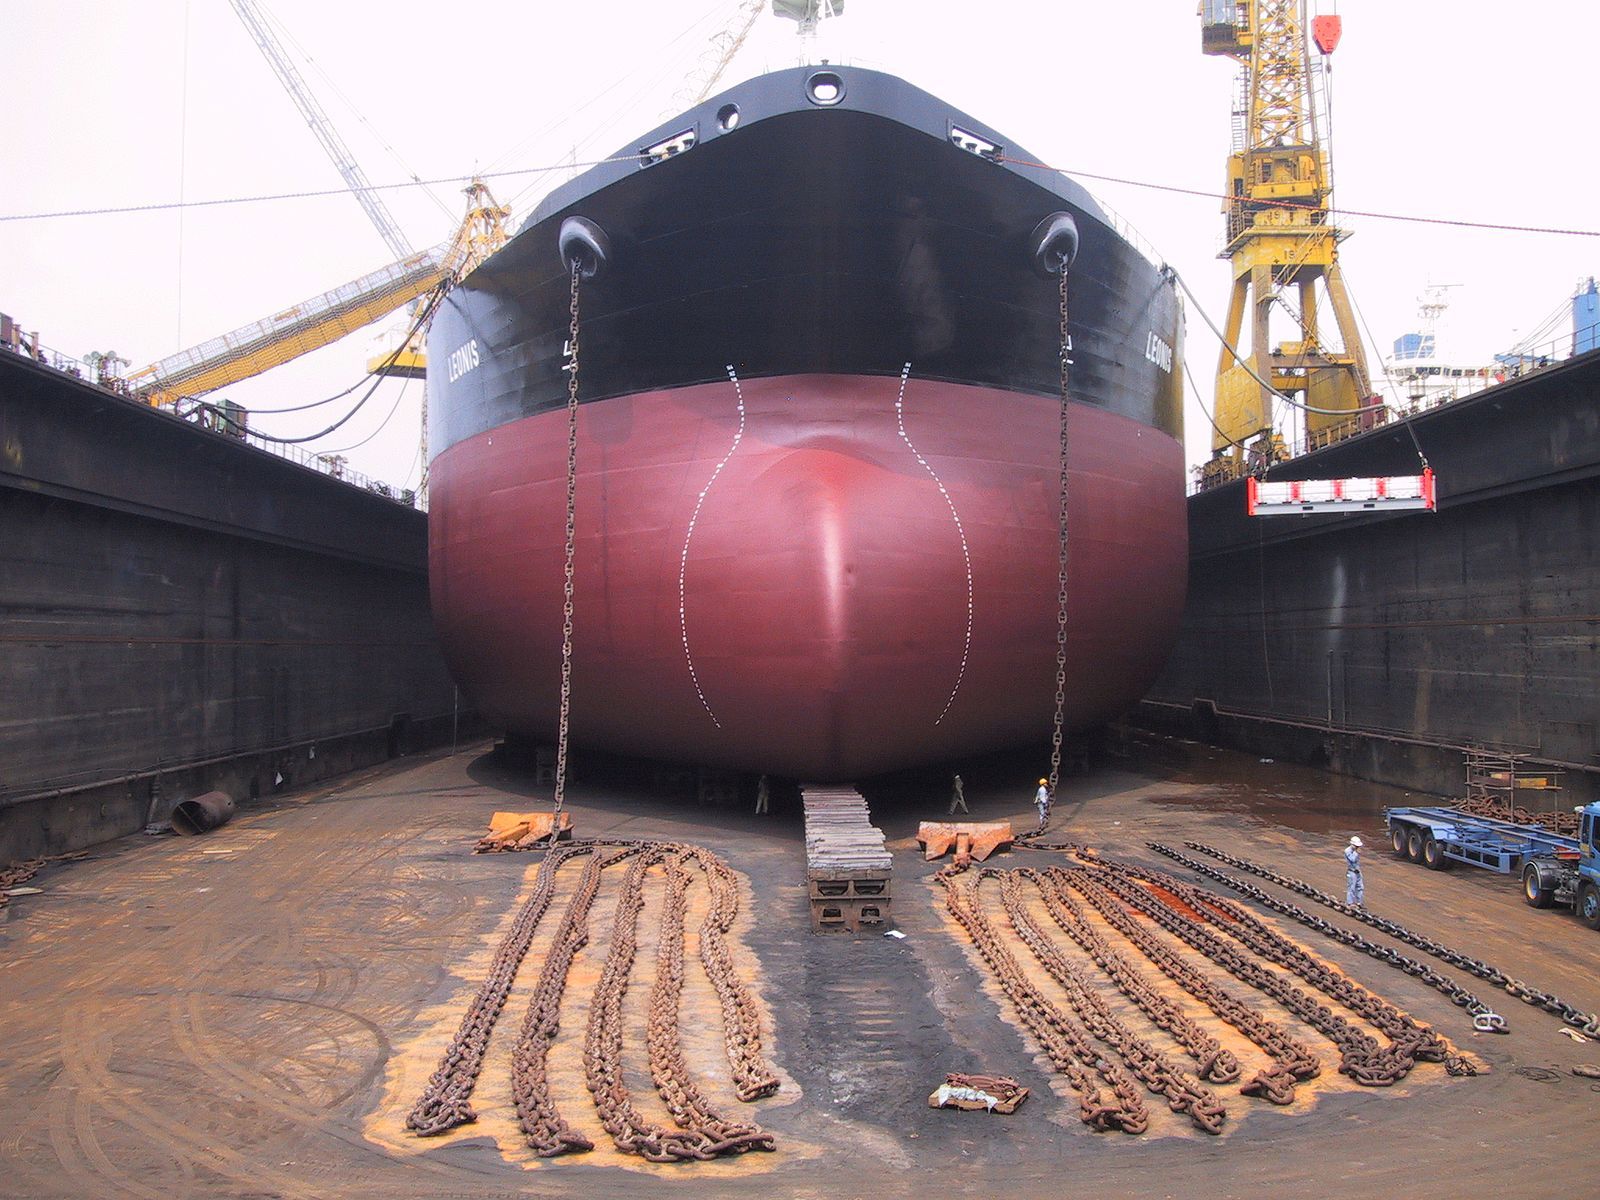 A ship in a dry dock